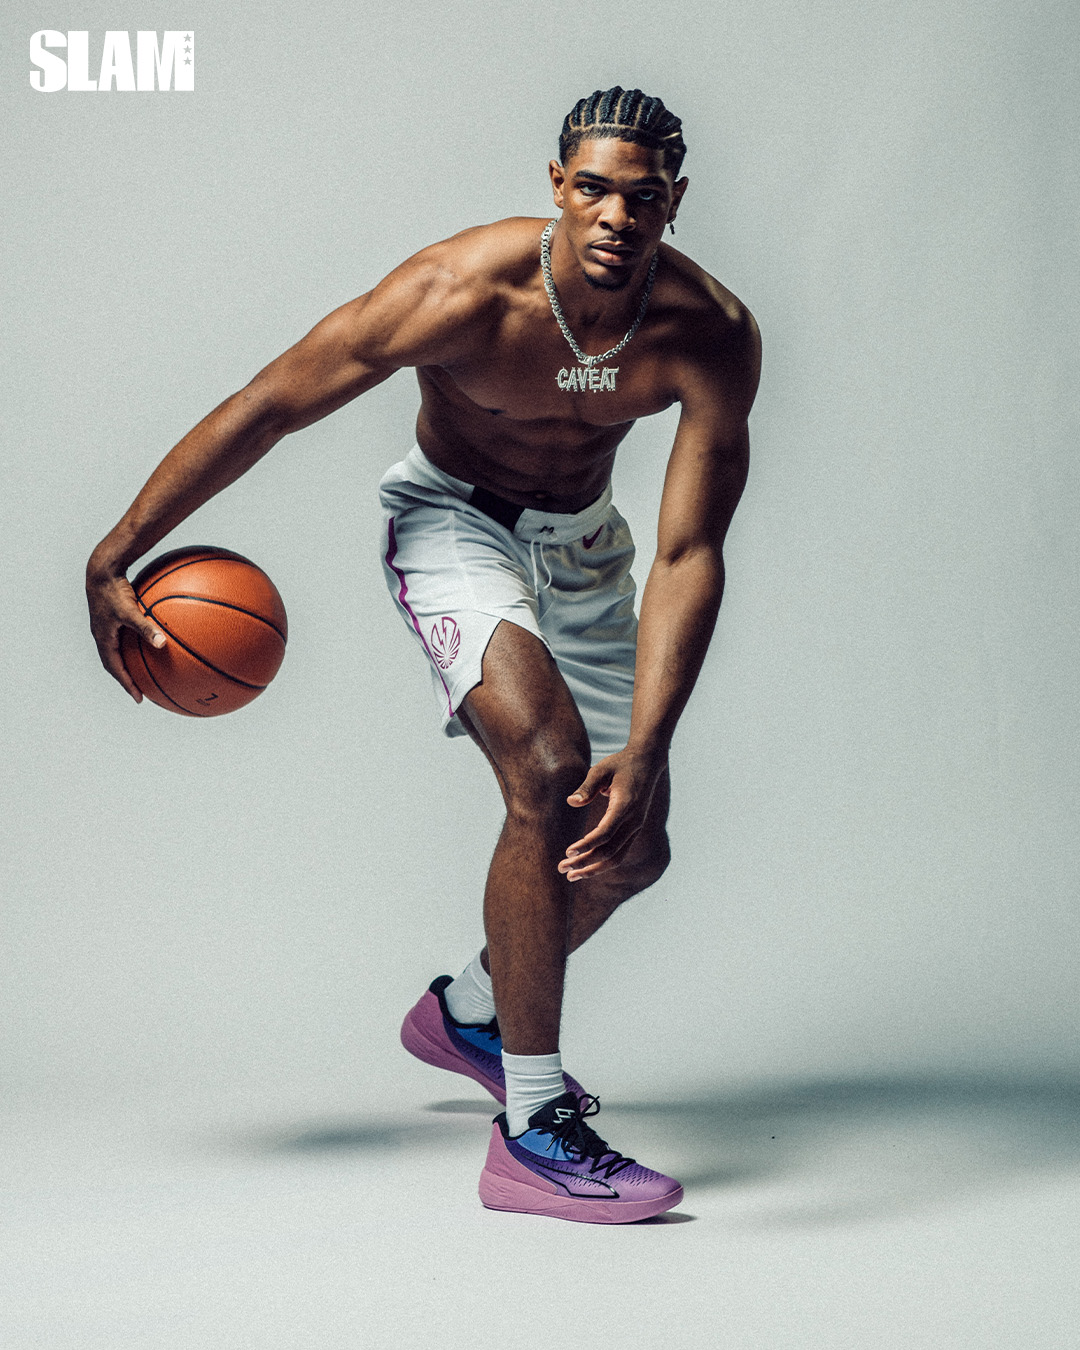 Basketball Star Scoot Henderson Signs Multi-Year Deal With Puma